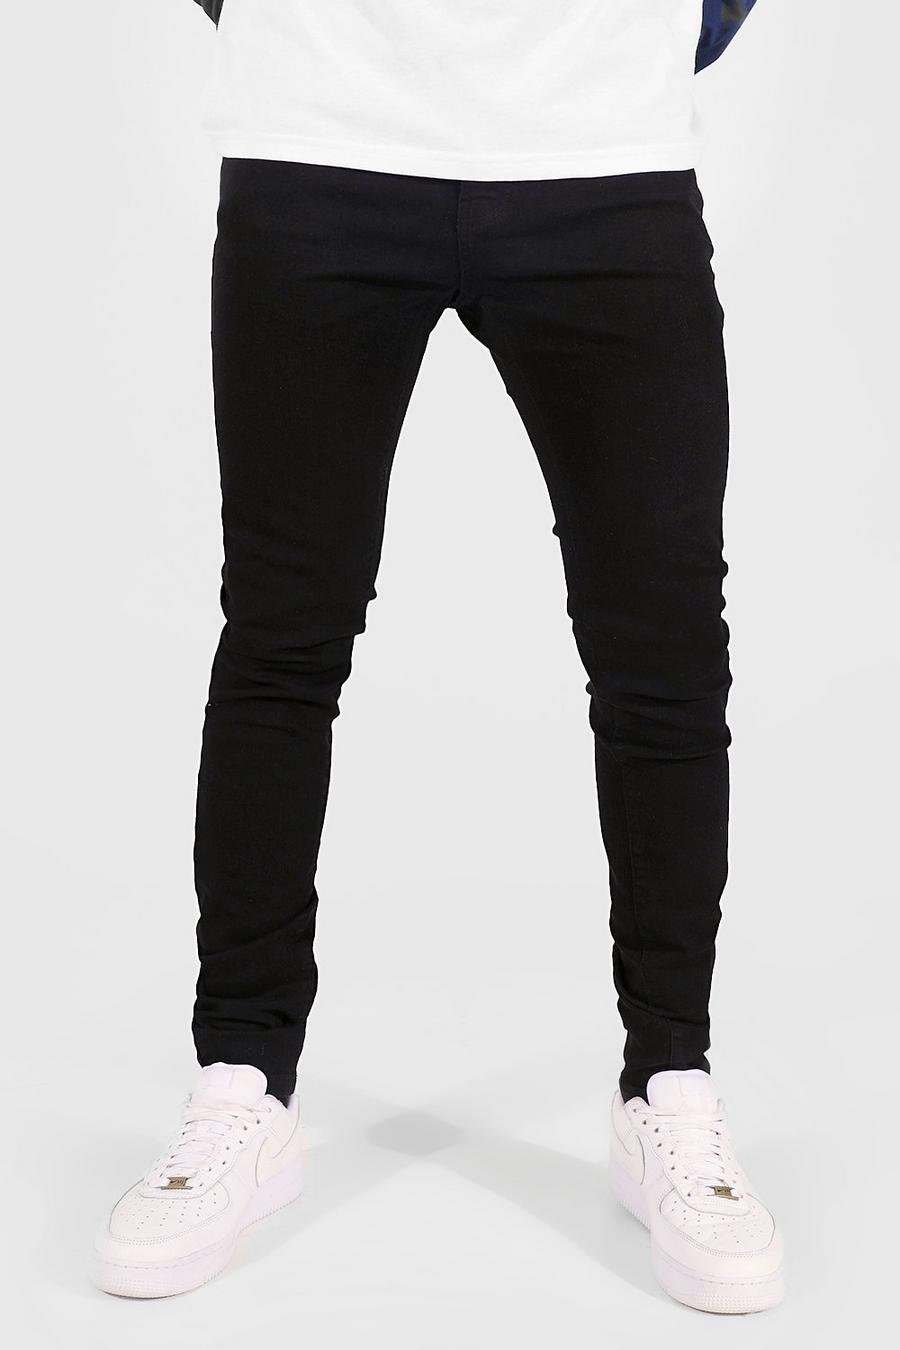 Tall - Jean coupe skinny, Black